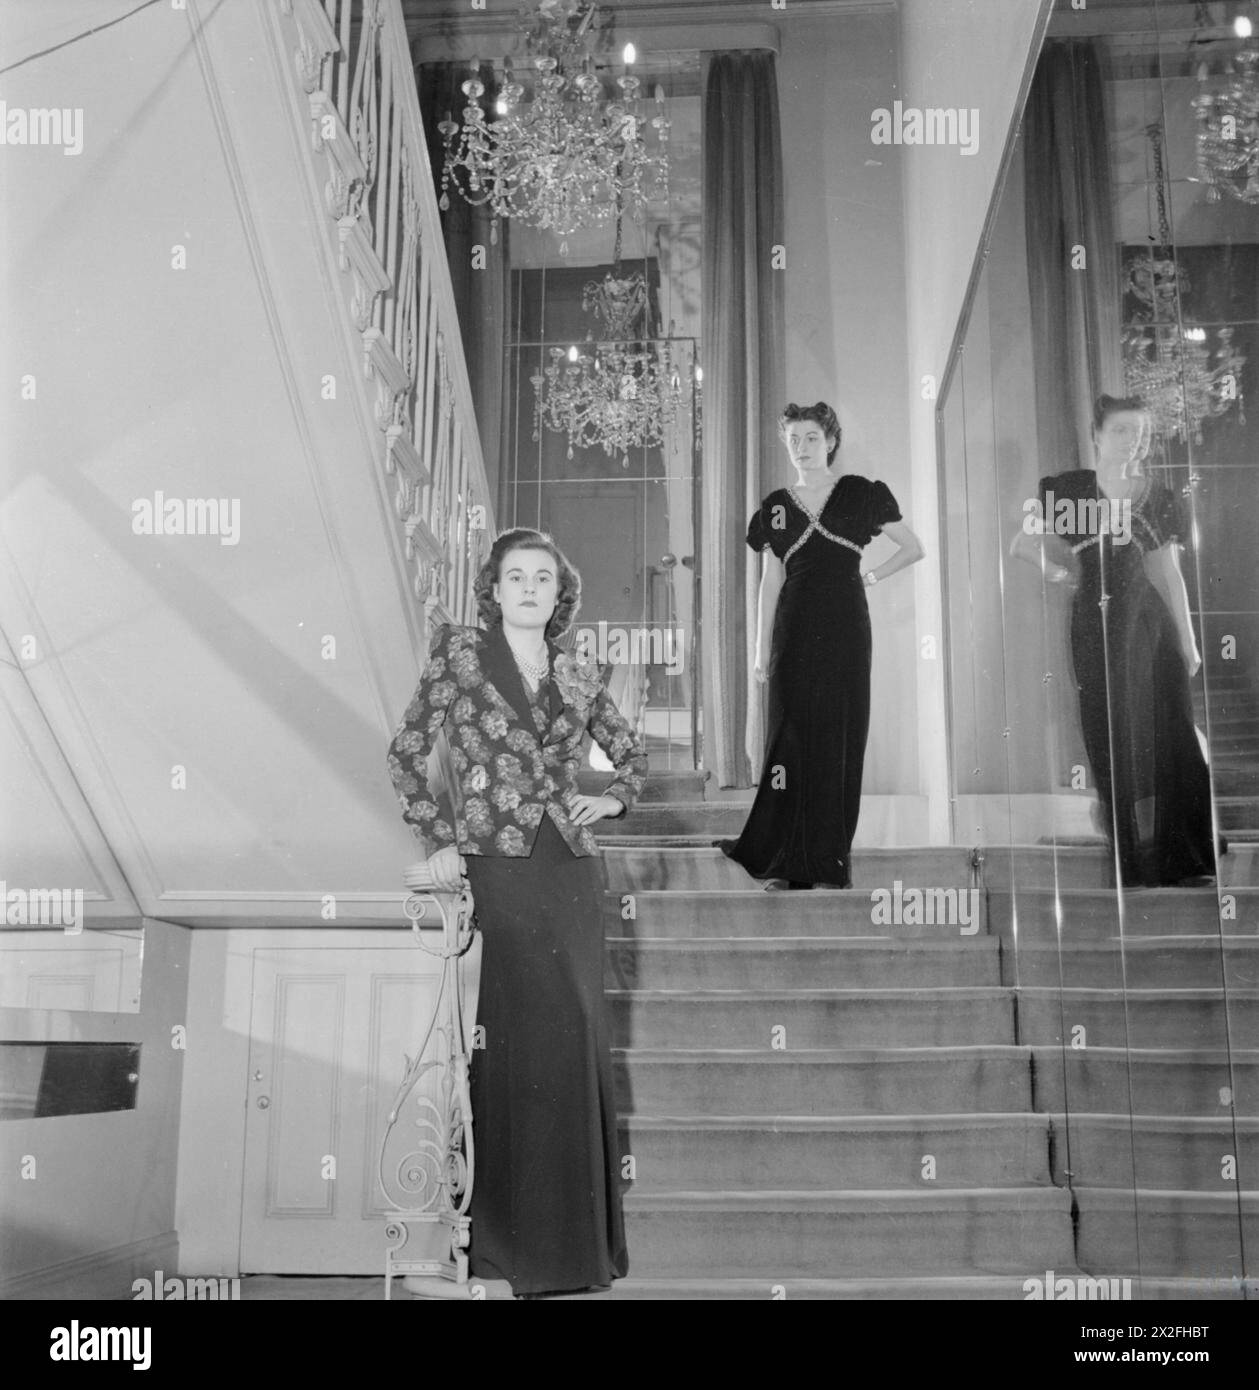 LONDON FASHION DESIGNERS: THE WORK OF MEMBERS OF THE INCORPORATED SOCIETY OF LONDON FASHION DESIGNERS IN WARTIME, LONDON, ENGLAND, UK, 1944 - Two models pose for the camera on a staircase at the fashion house of designer Norman Hartnell. At the top of the stairs, the model wears a black velvet dinner gown studded in blue and gold. In the foreground, the model wears a dinner suit with the jacket made from a red rose printed fabric, designed by Hartnell and a skirt of black crepe. A large chandelier is clearly visible in the background Stock Photo